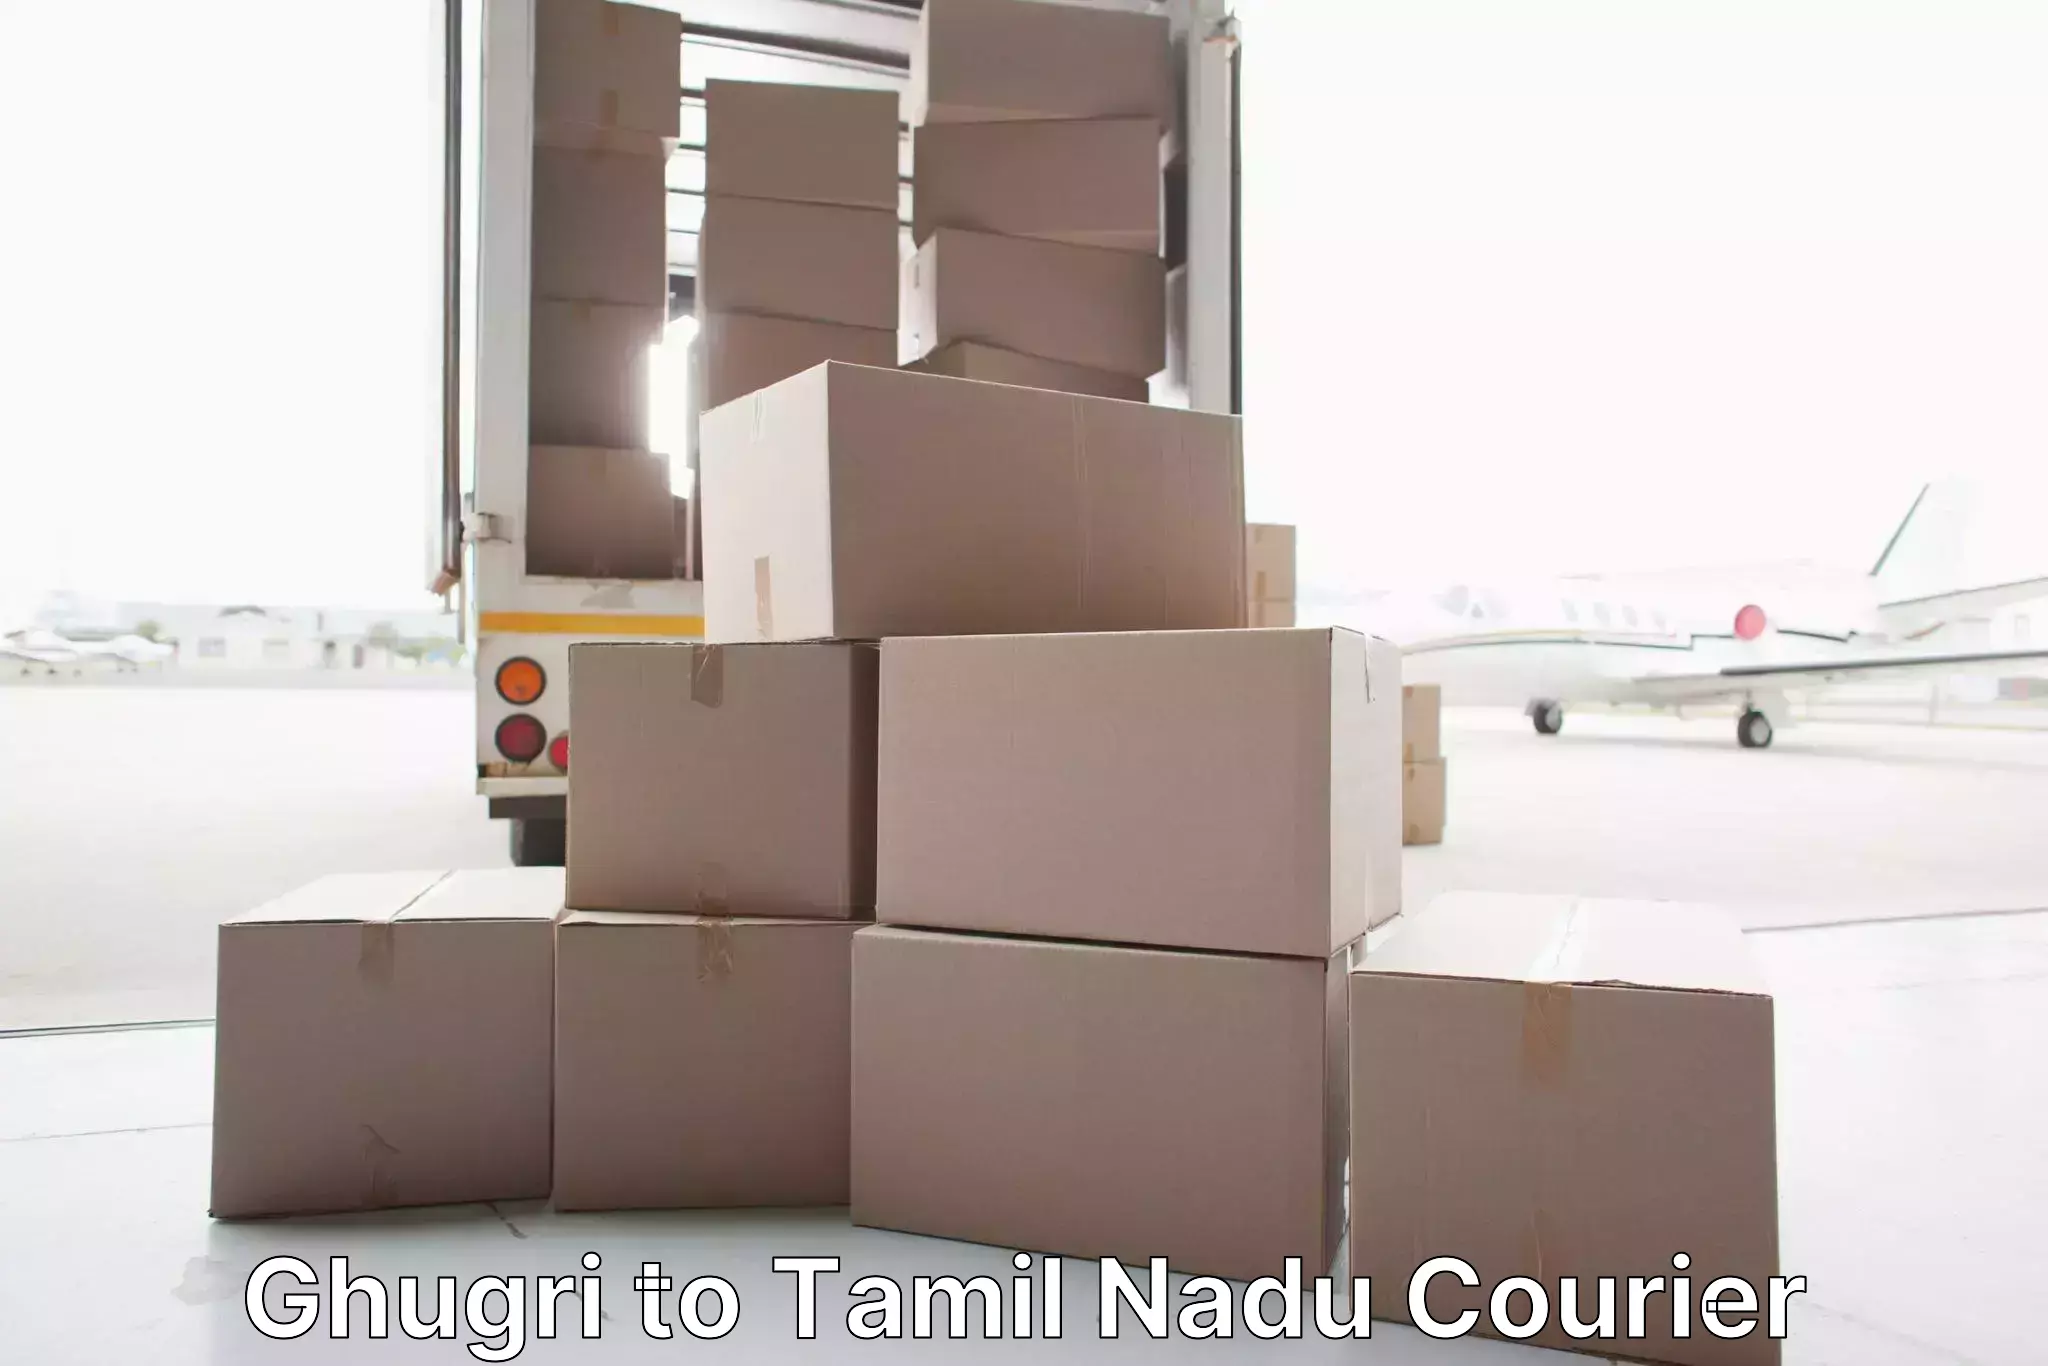 Quality relocation assistance Ghugri to Tuticorin